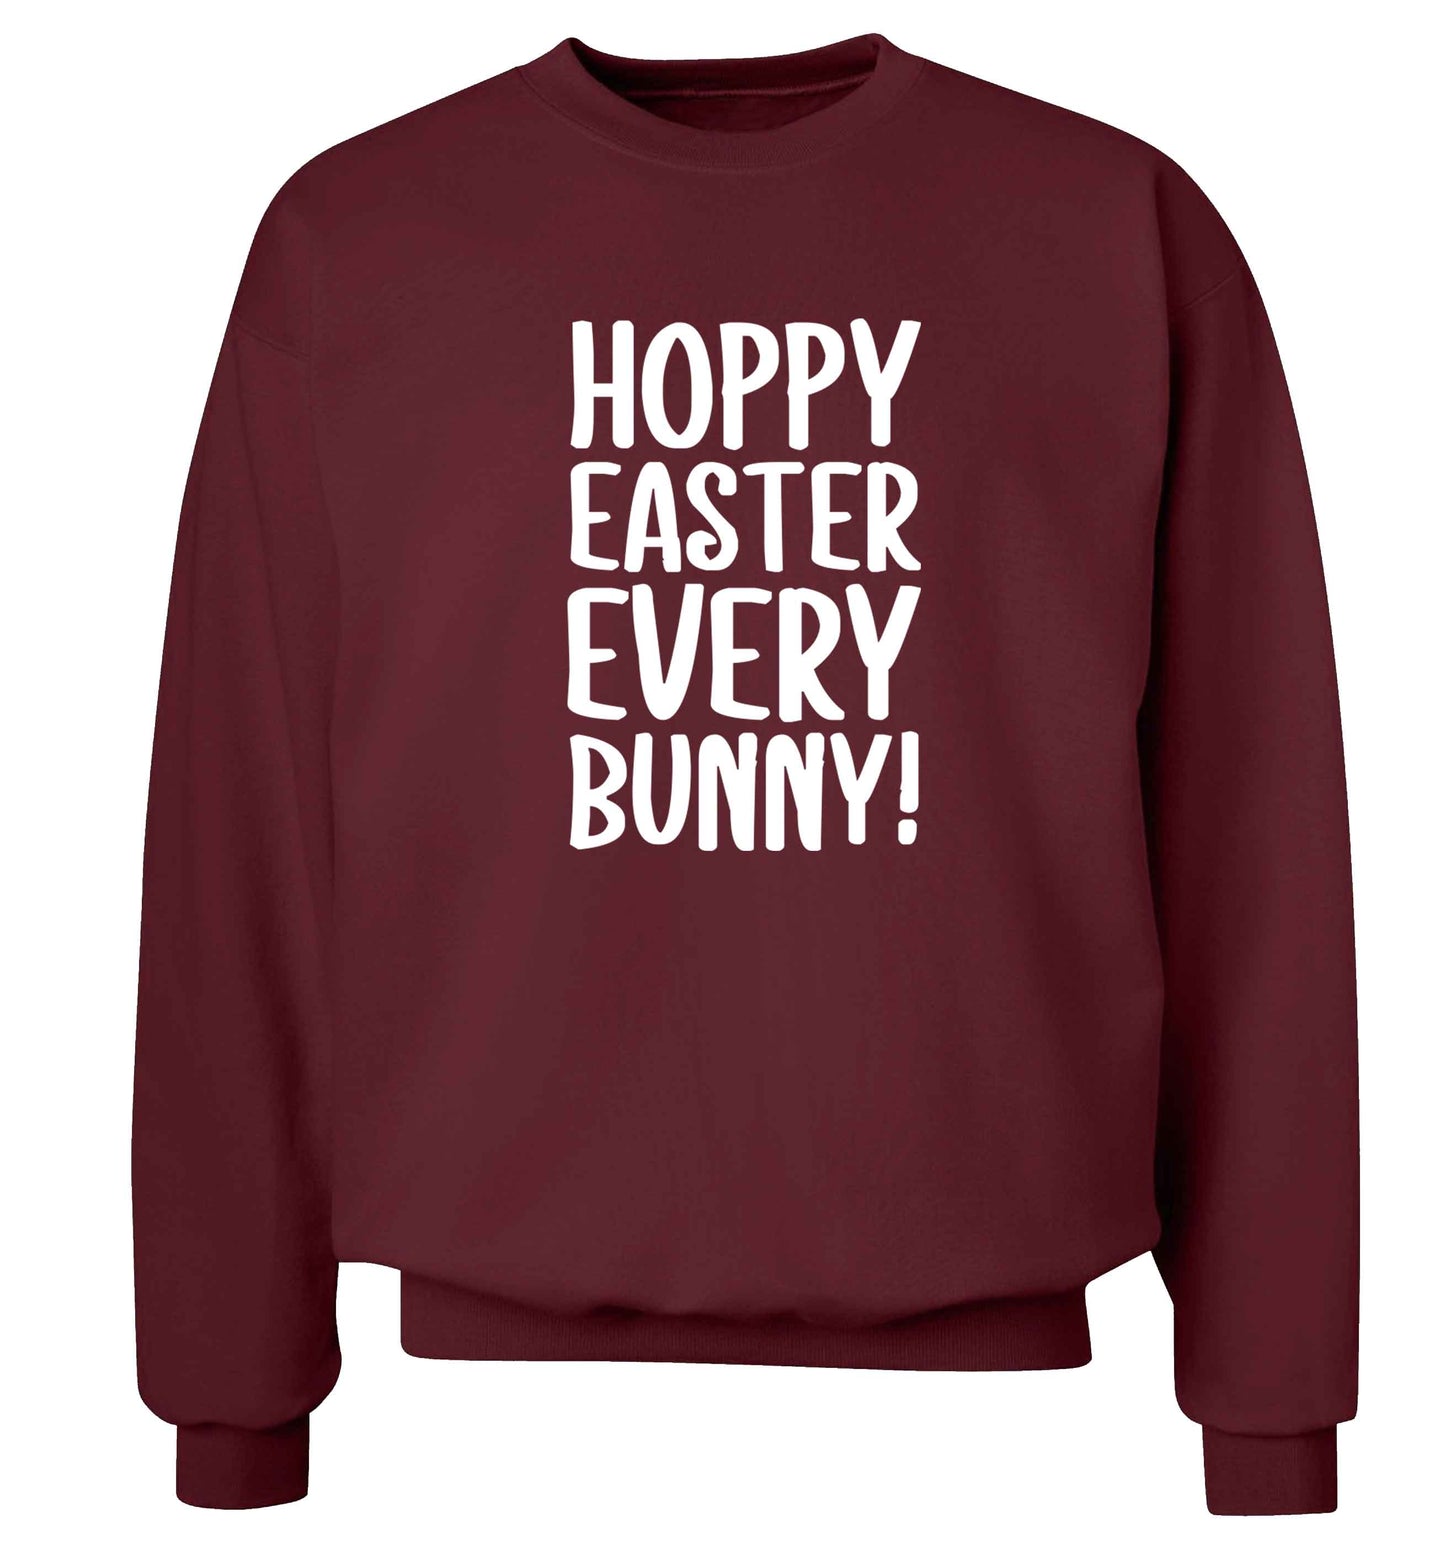 Hoppy Easter every bunny! adult's unisex maroon sweater 2XL